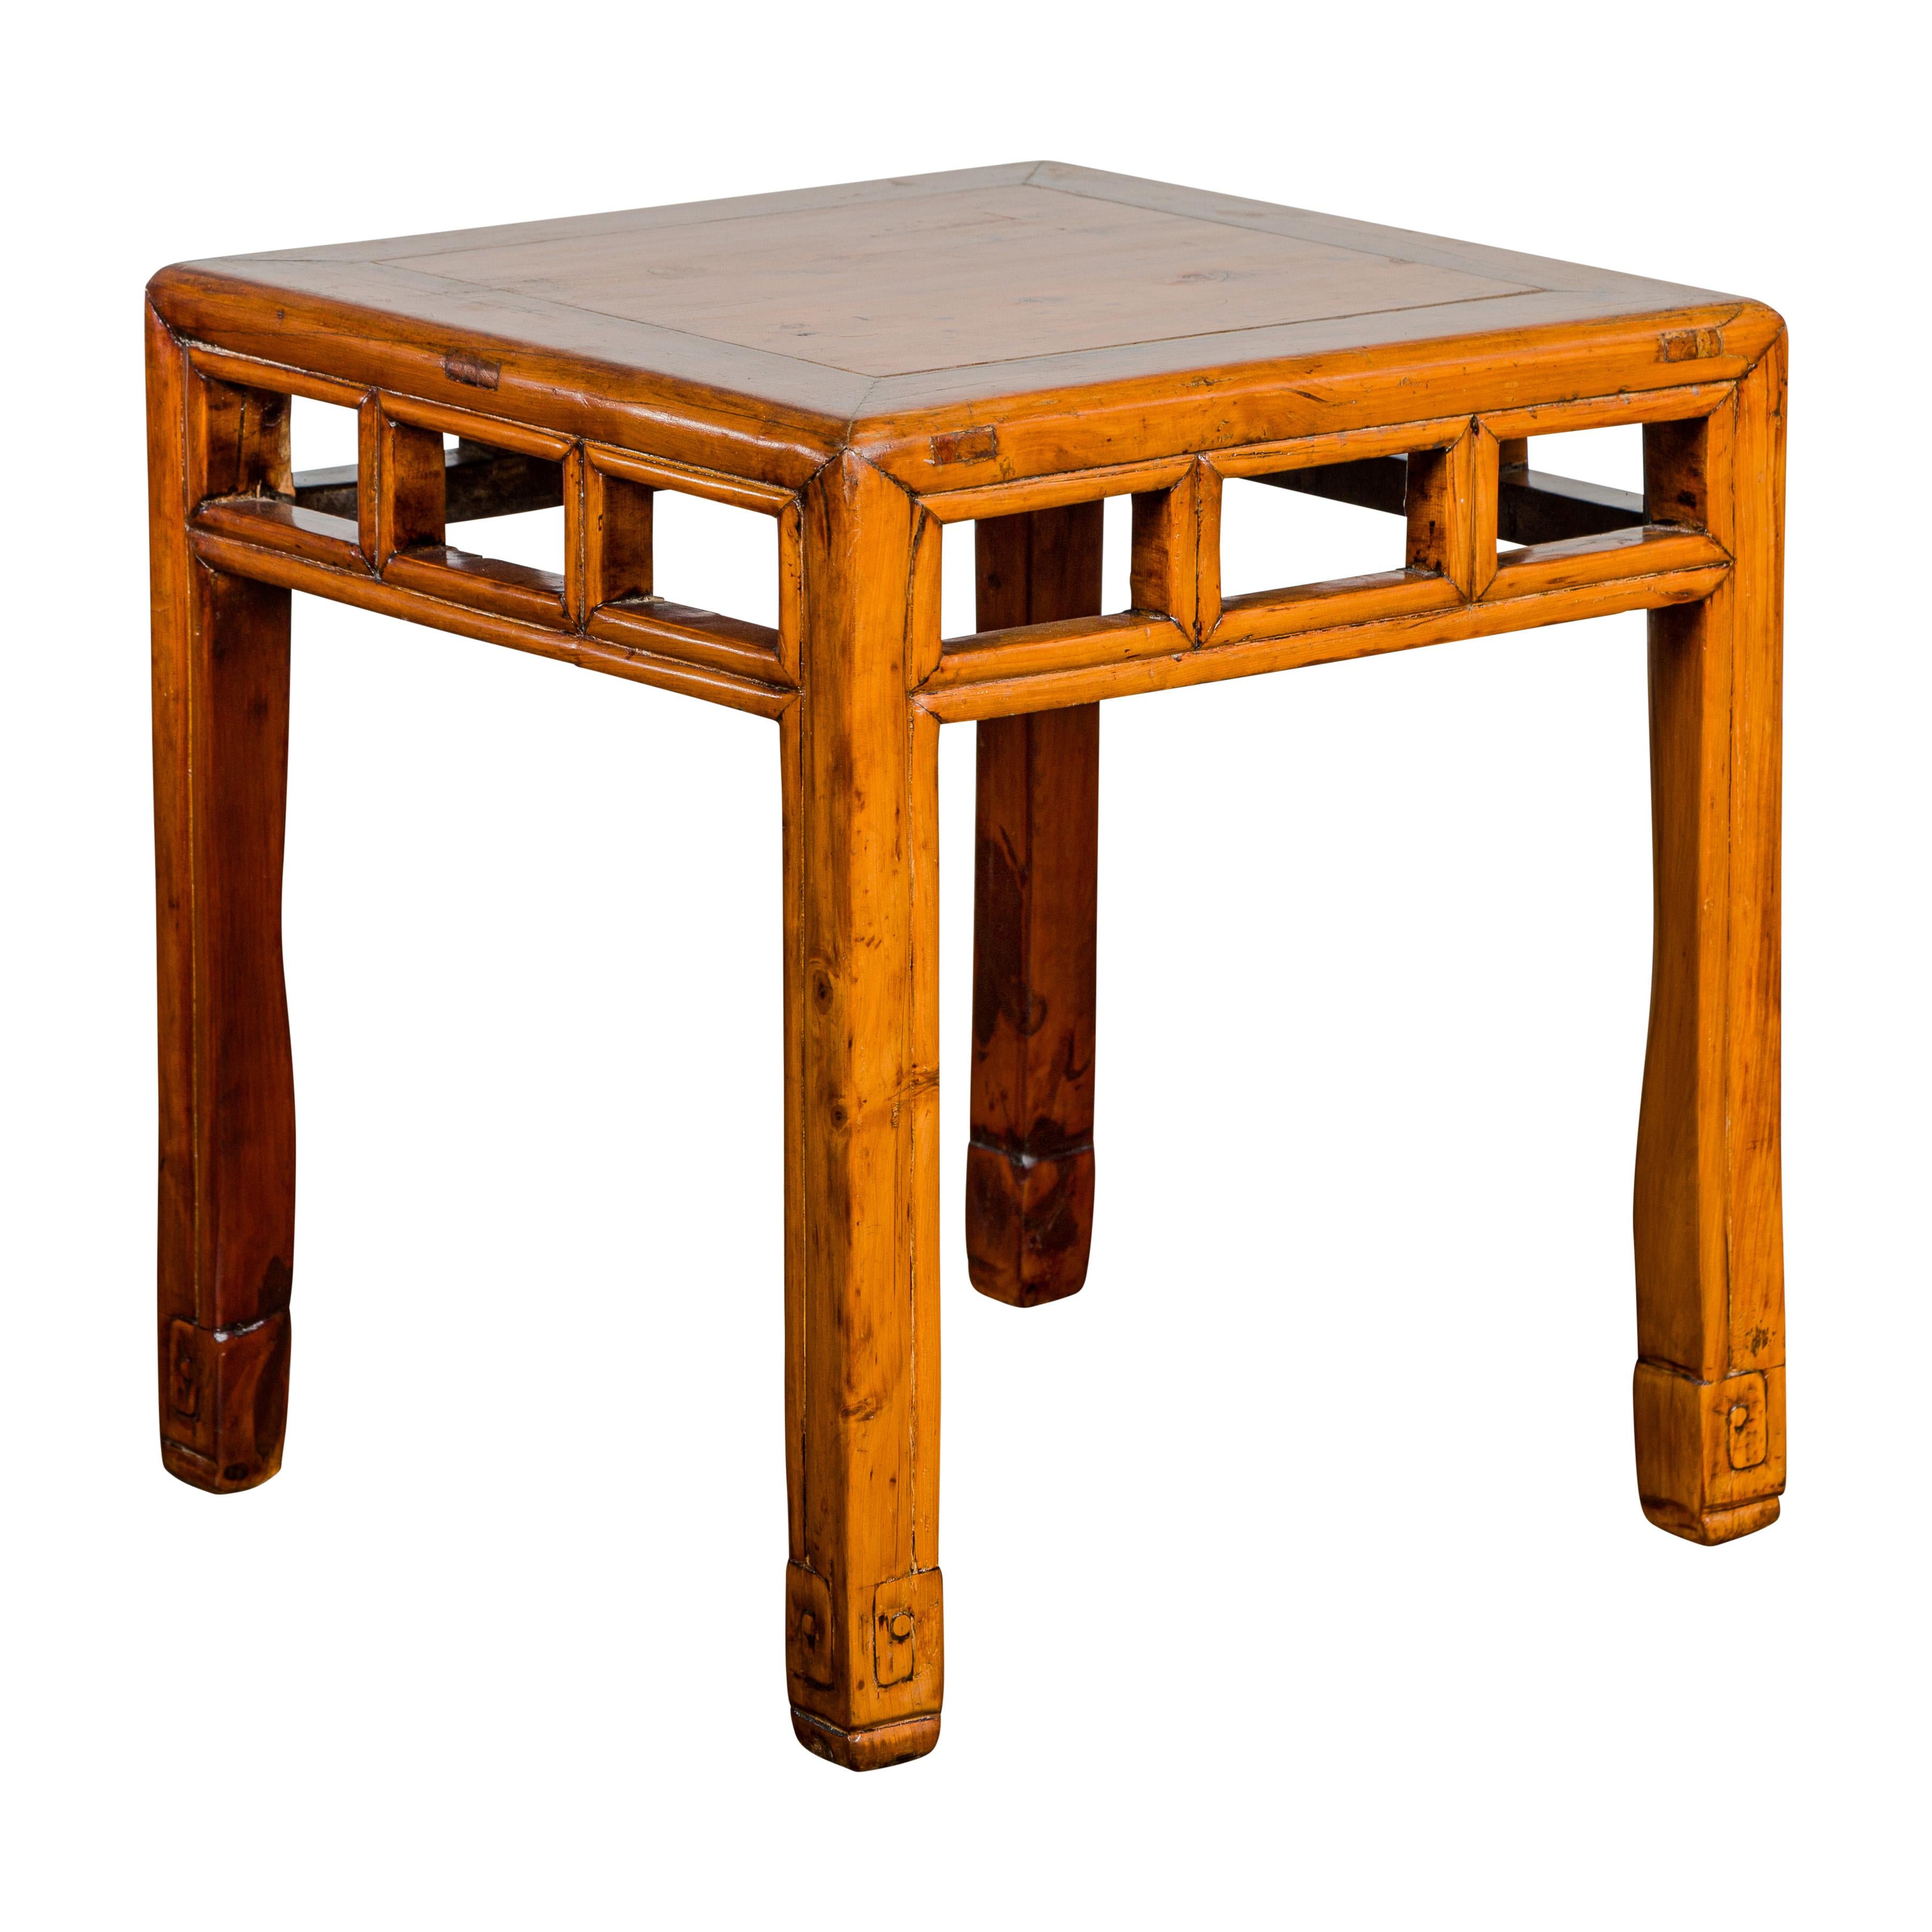 Late Qing Dynasty Period Side Table with Pillar Strut Motifs and Scroll Feet For Sale 9